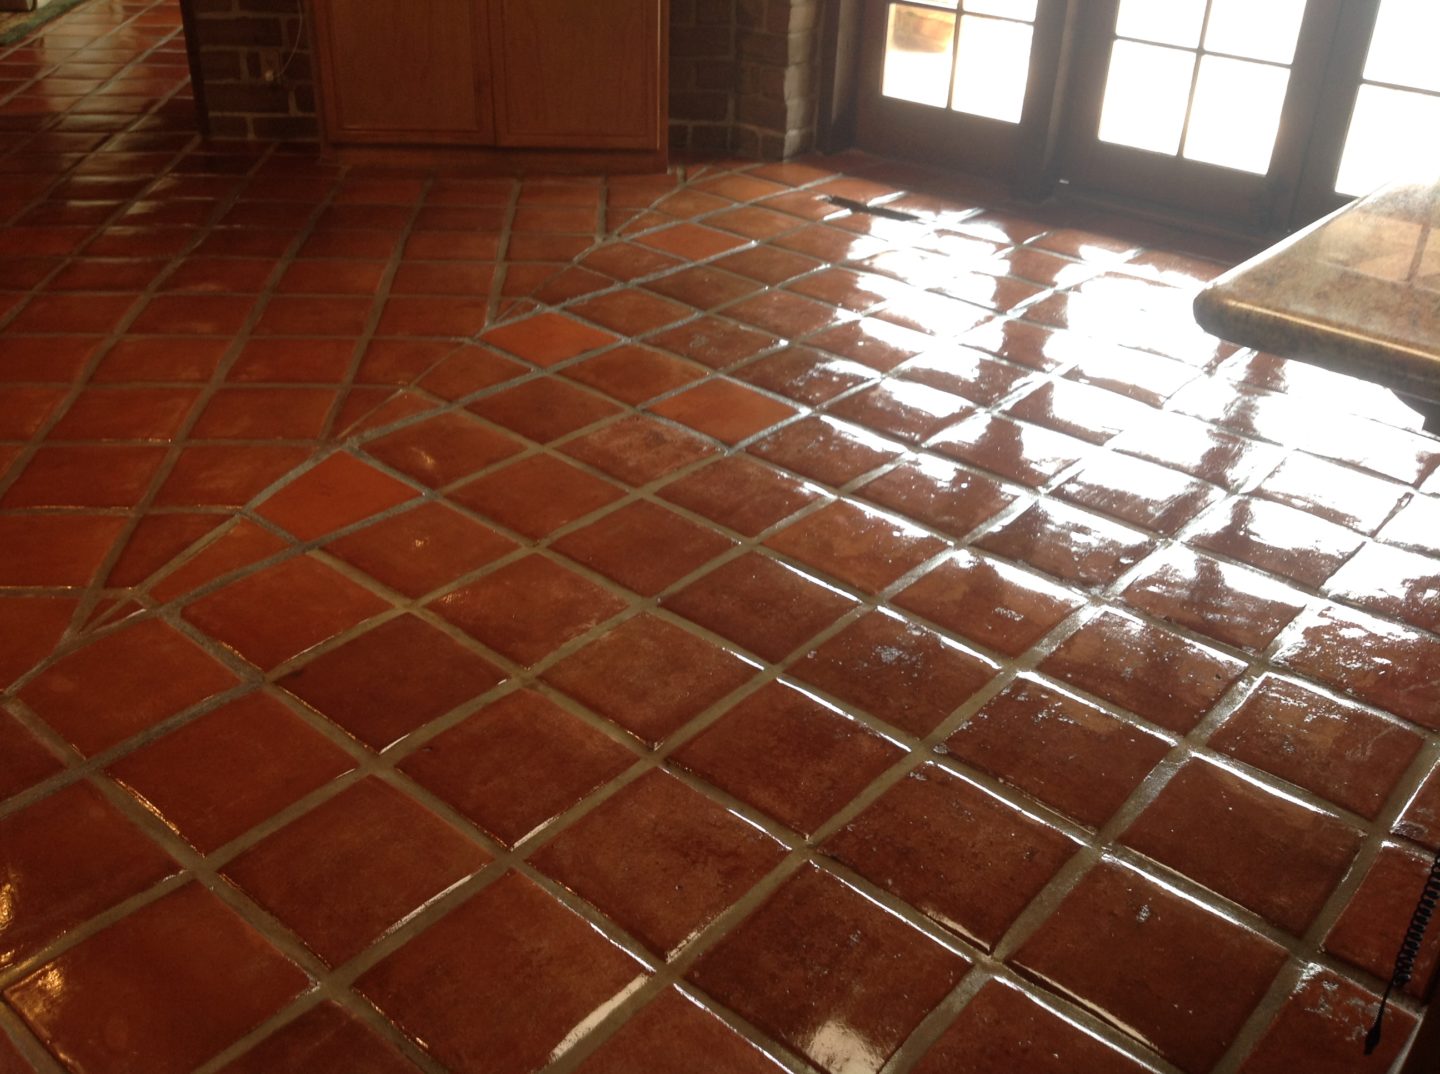 About Saltillo Tile Flooring, What Flooring Goes With Saltillo Tile